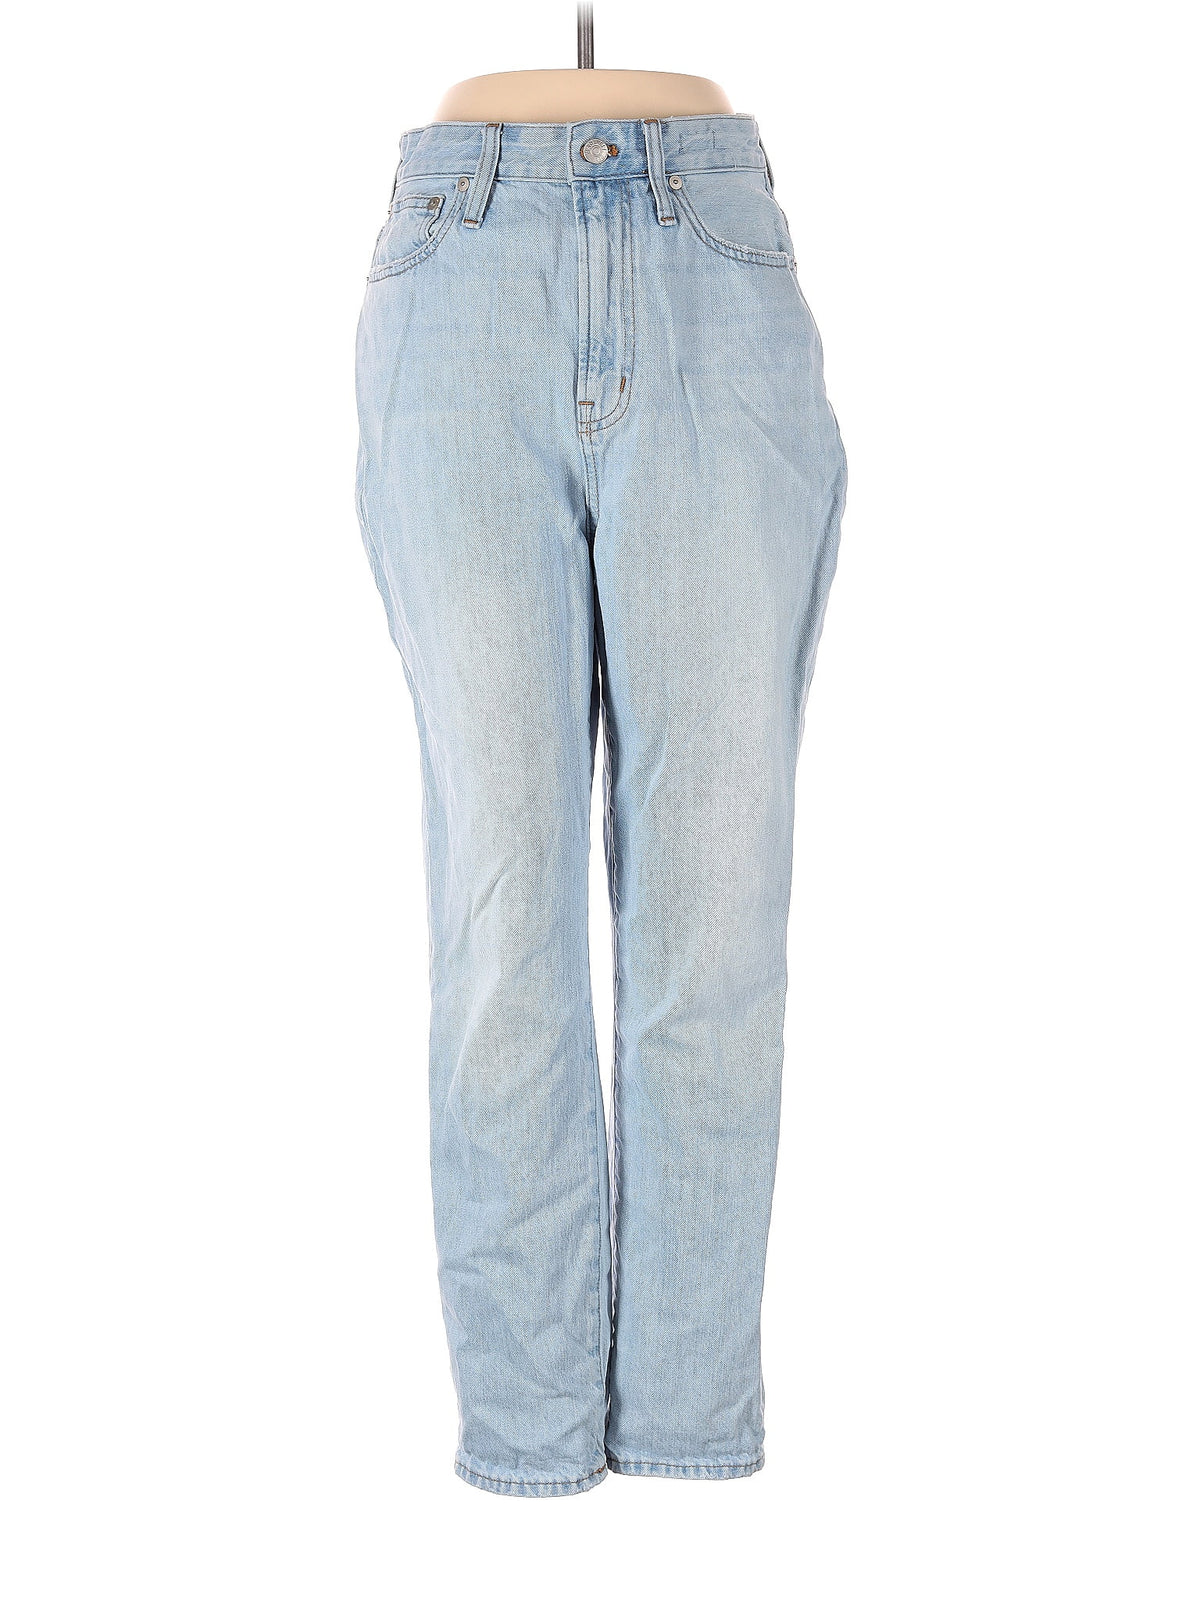 High-Rise Straight-leg Jeans in Light Wash waist size - 27